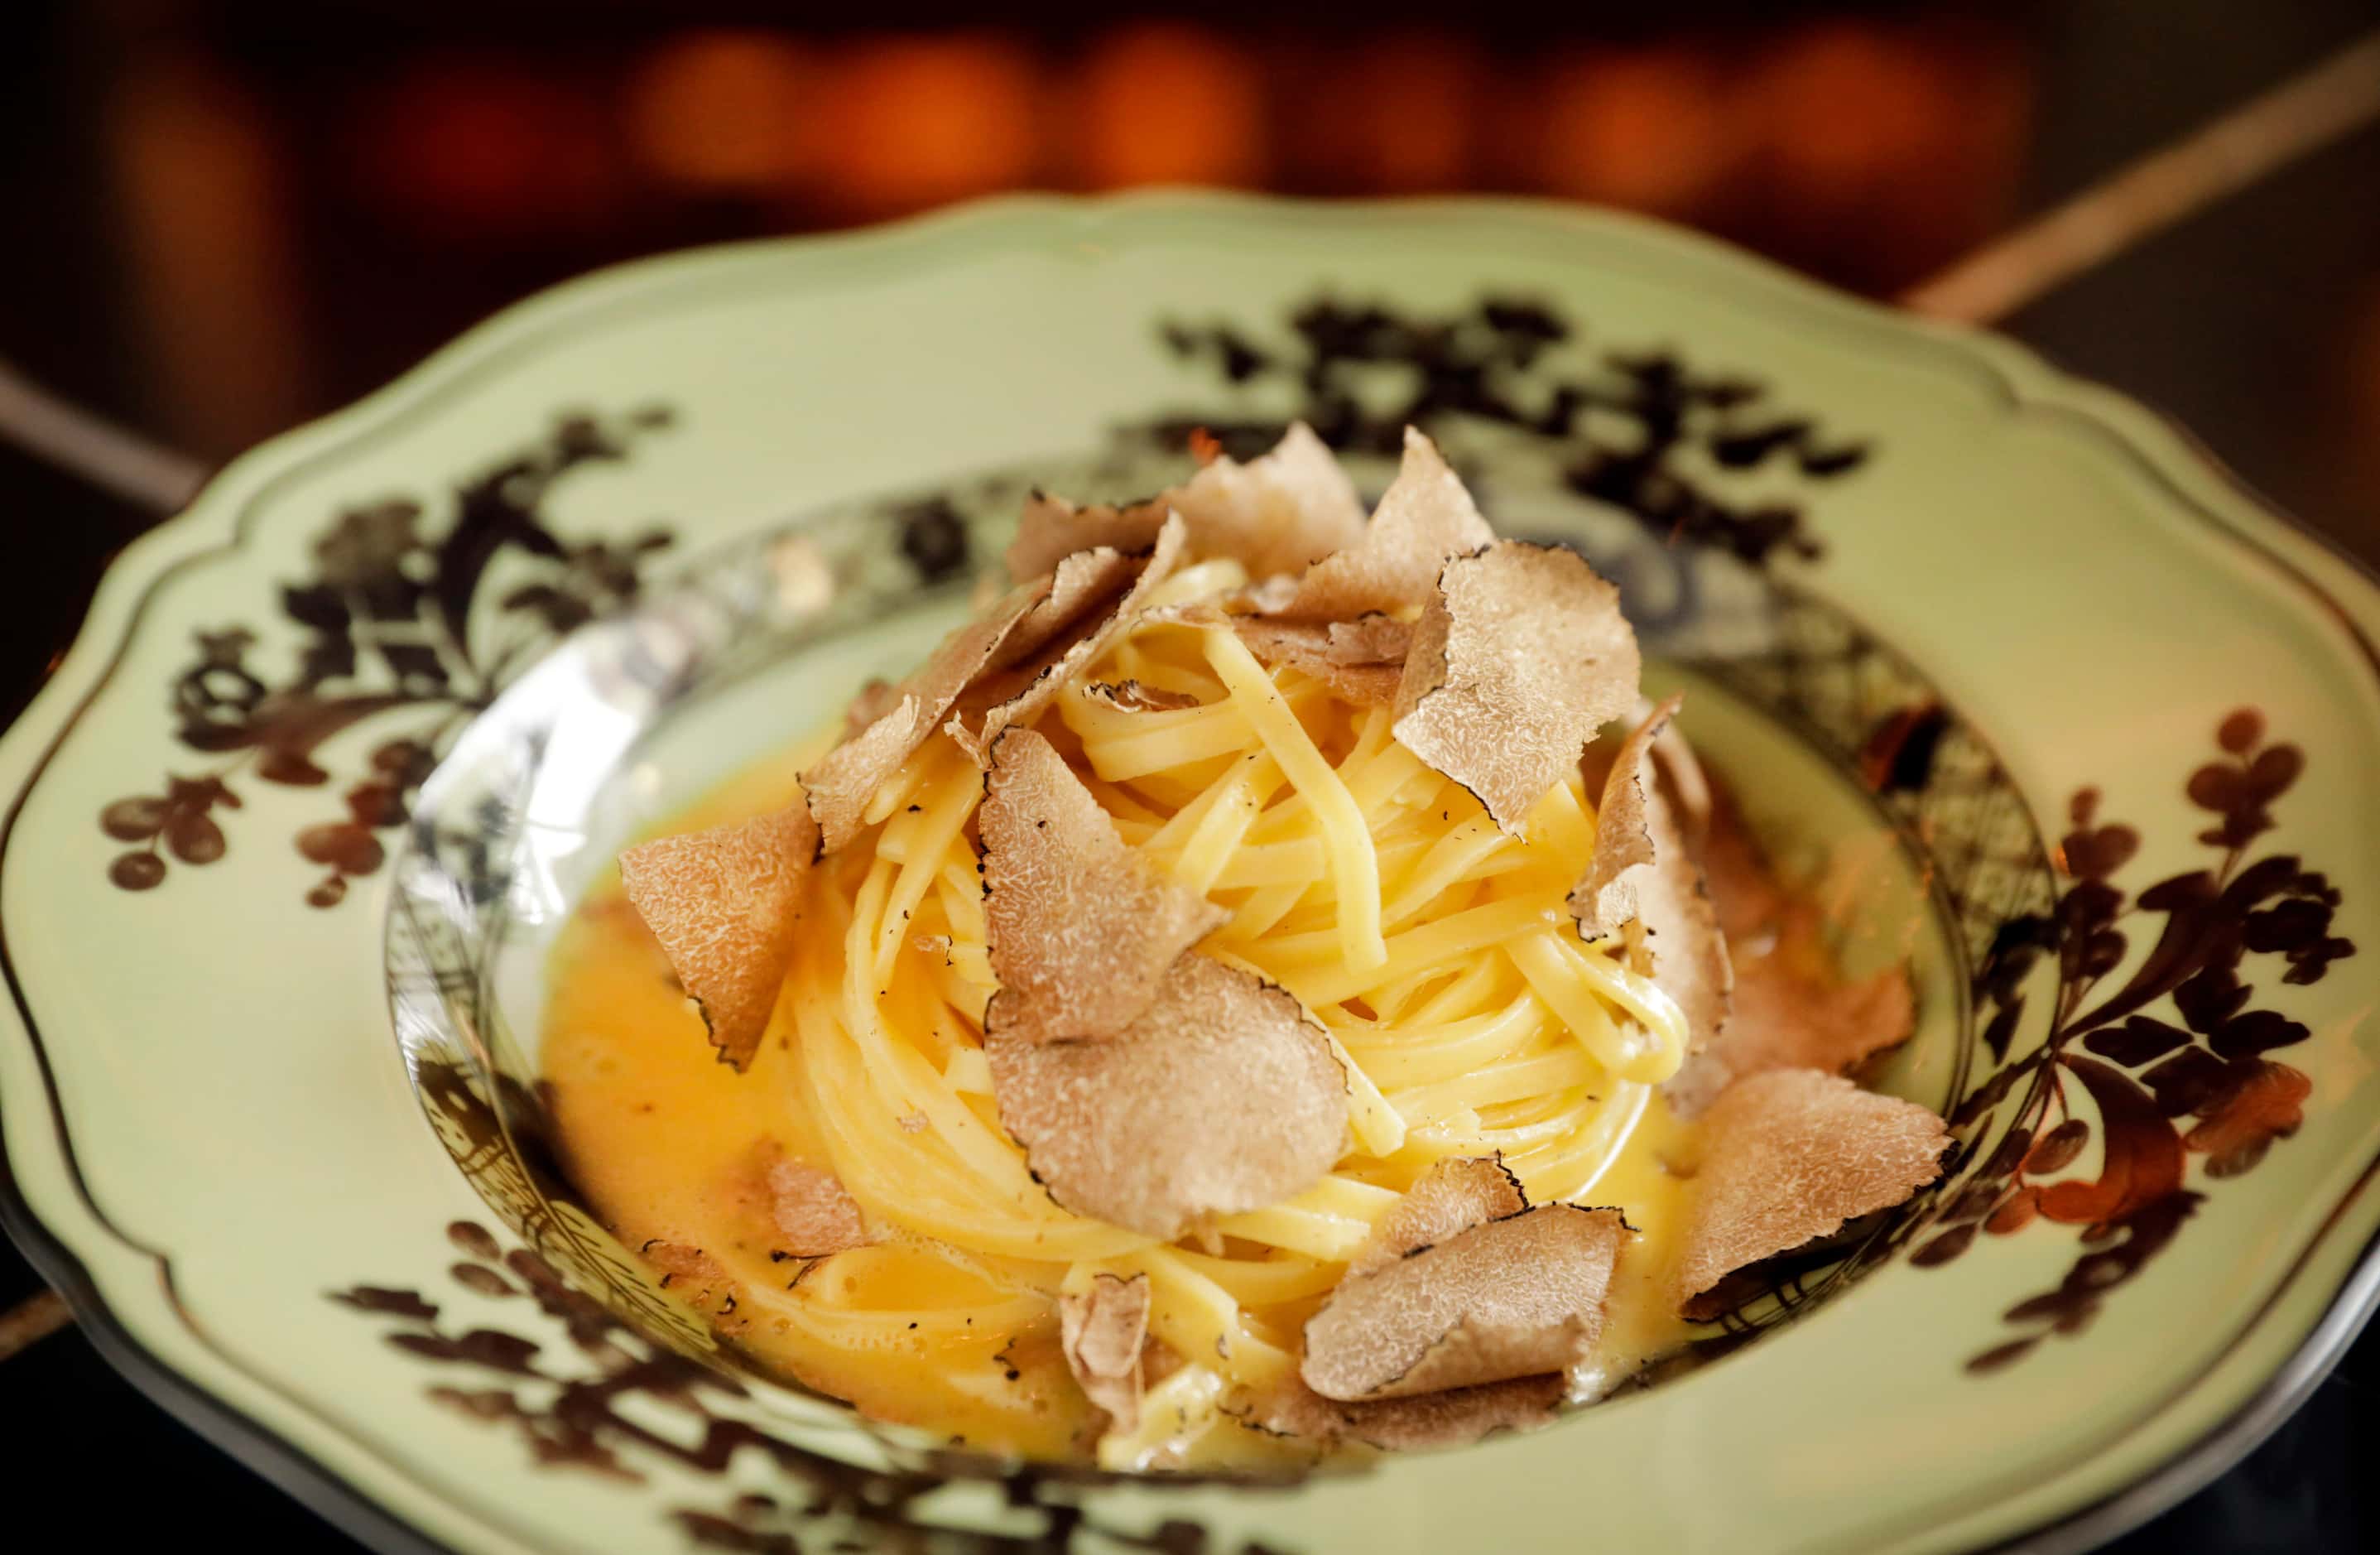 Pasta al Tartufo is an off-the-menu item, for now, at Bar Colette in Dallas.